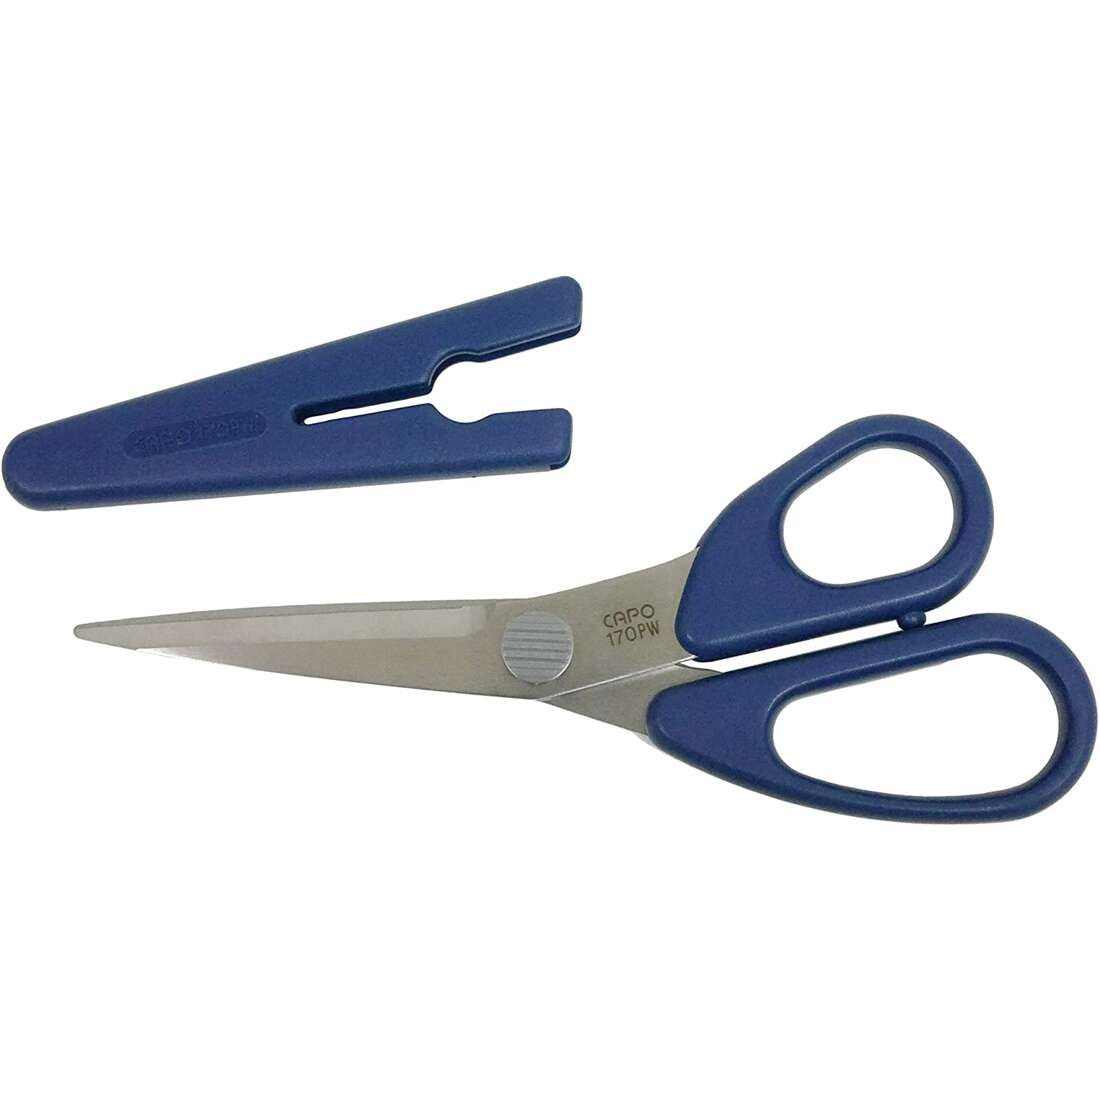 Bordeaux 17cm fabric scissors with cover by Clover - modeS4u